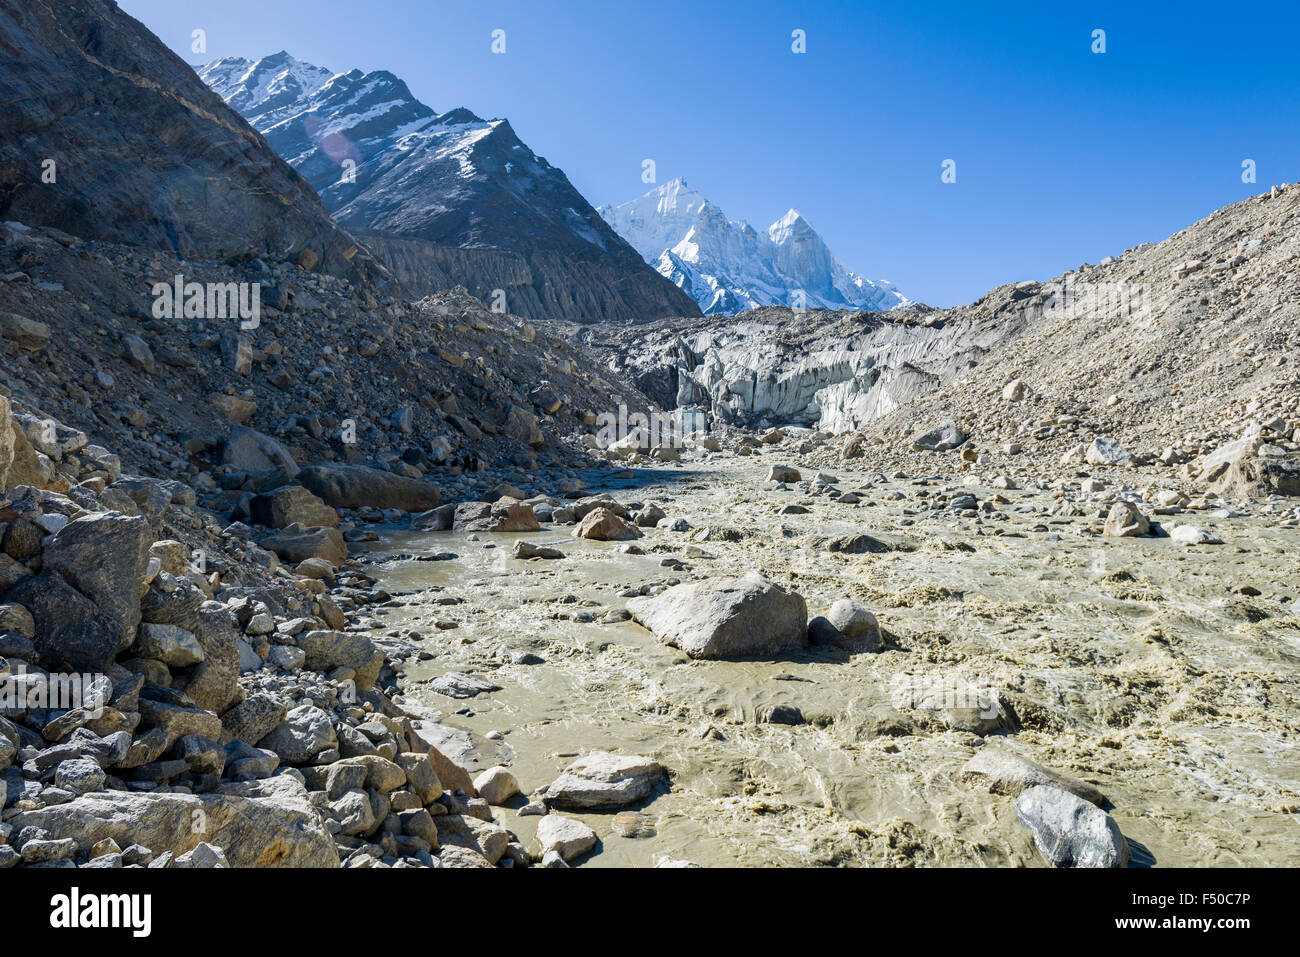 Gaumukh, the main source of the holy river Ganges, is located at the break-off edge of the Bhaghirati Glacier Stock Photo